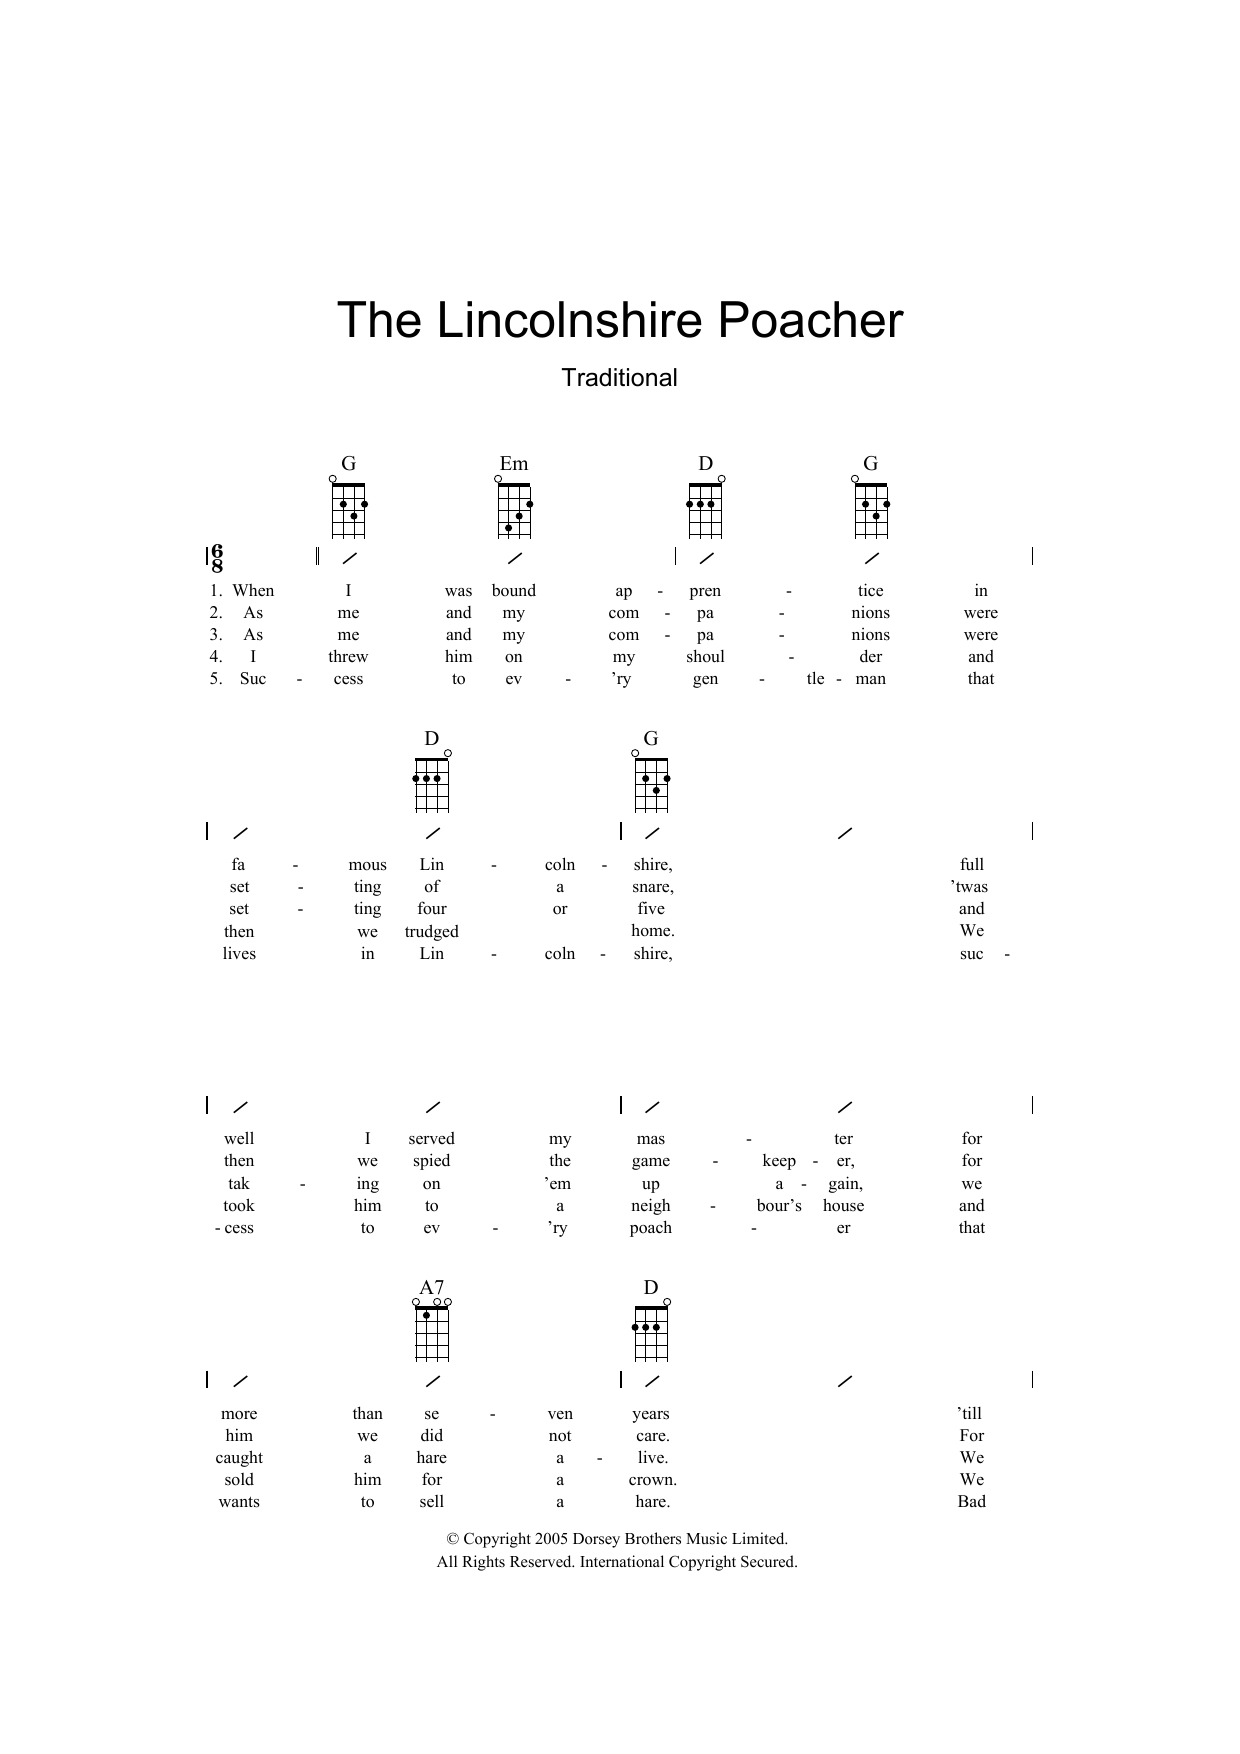 Download Traditional The Lincolnshire Poacher Sheet Music